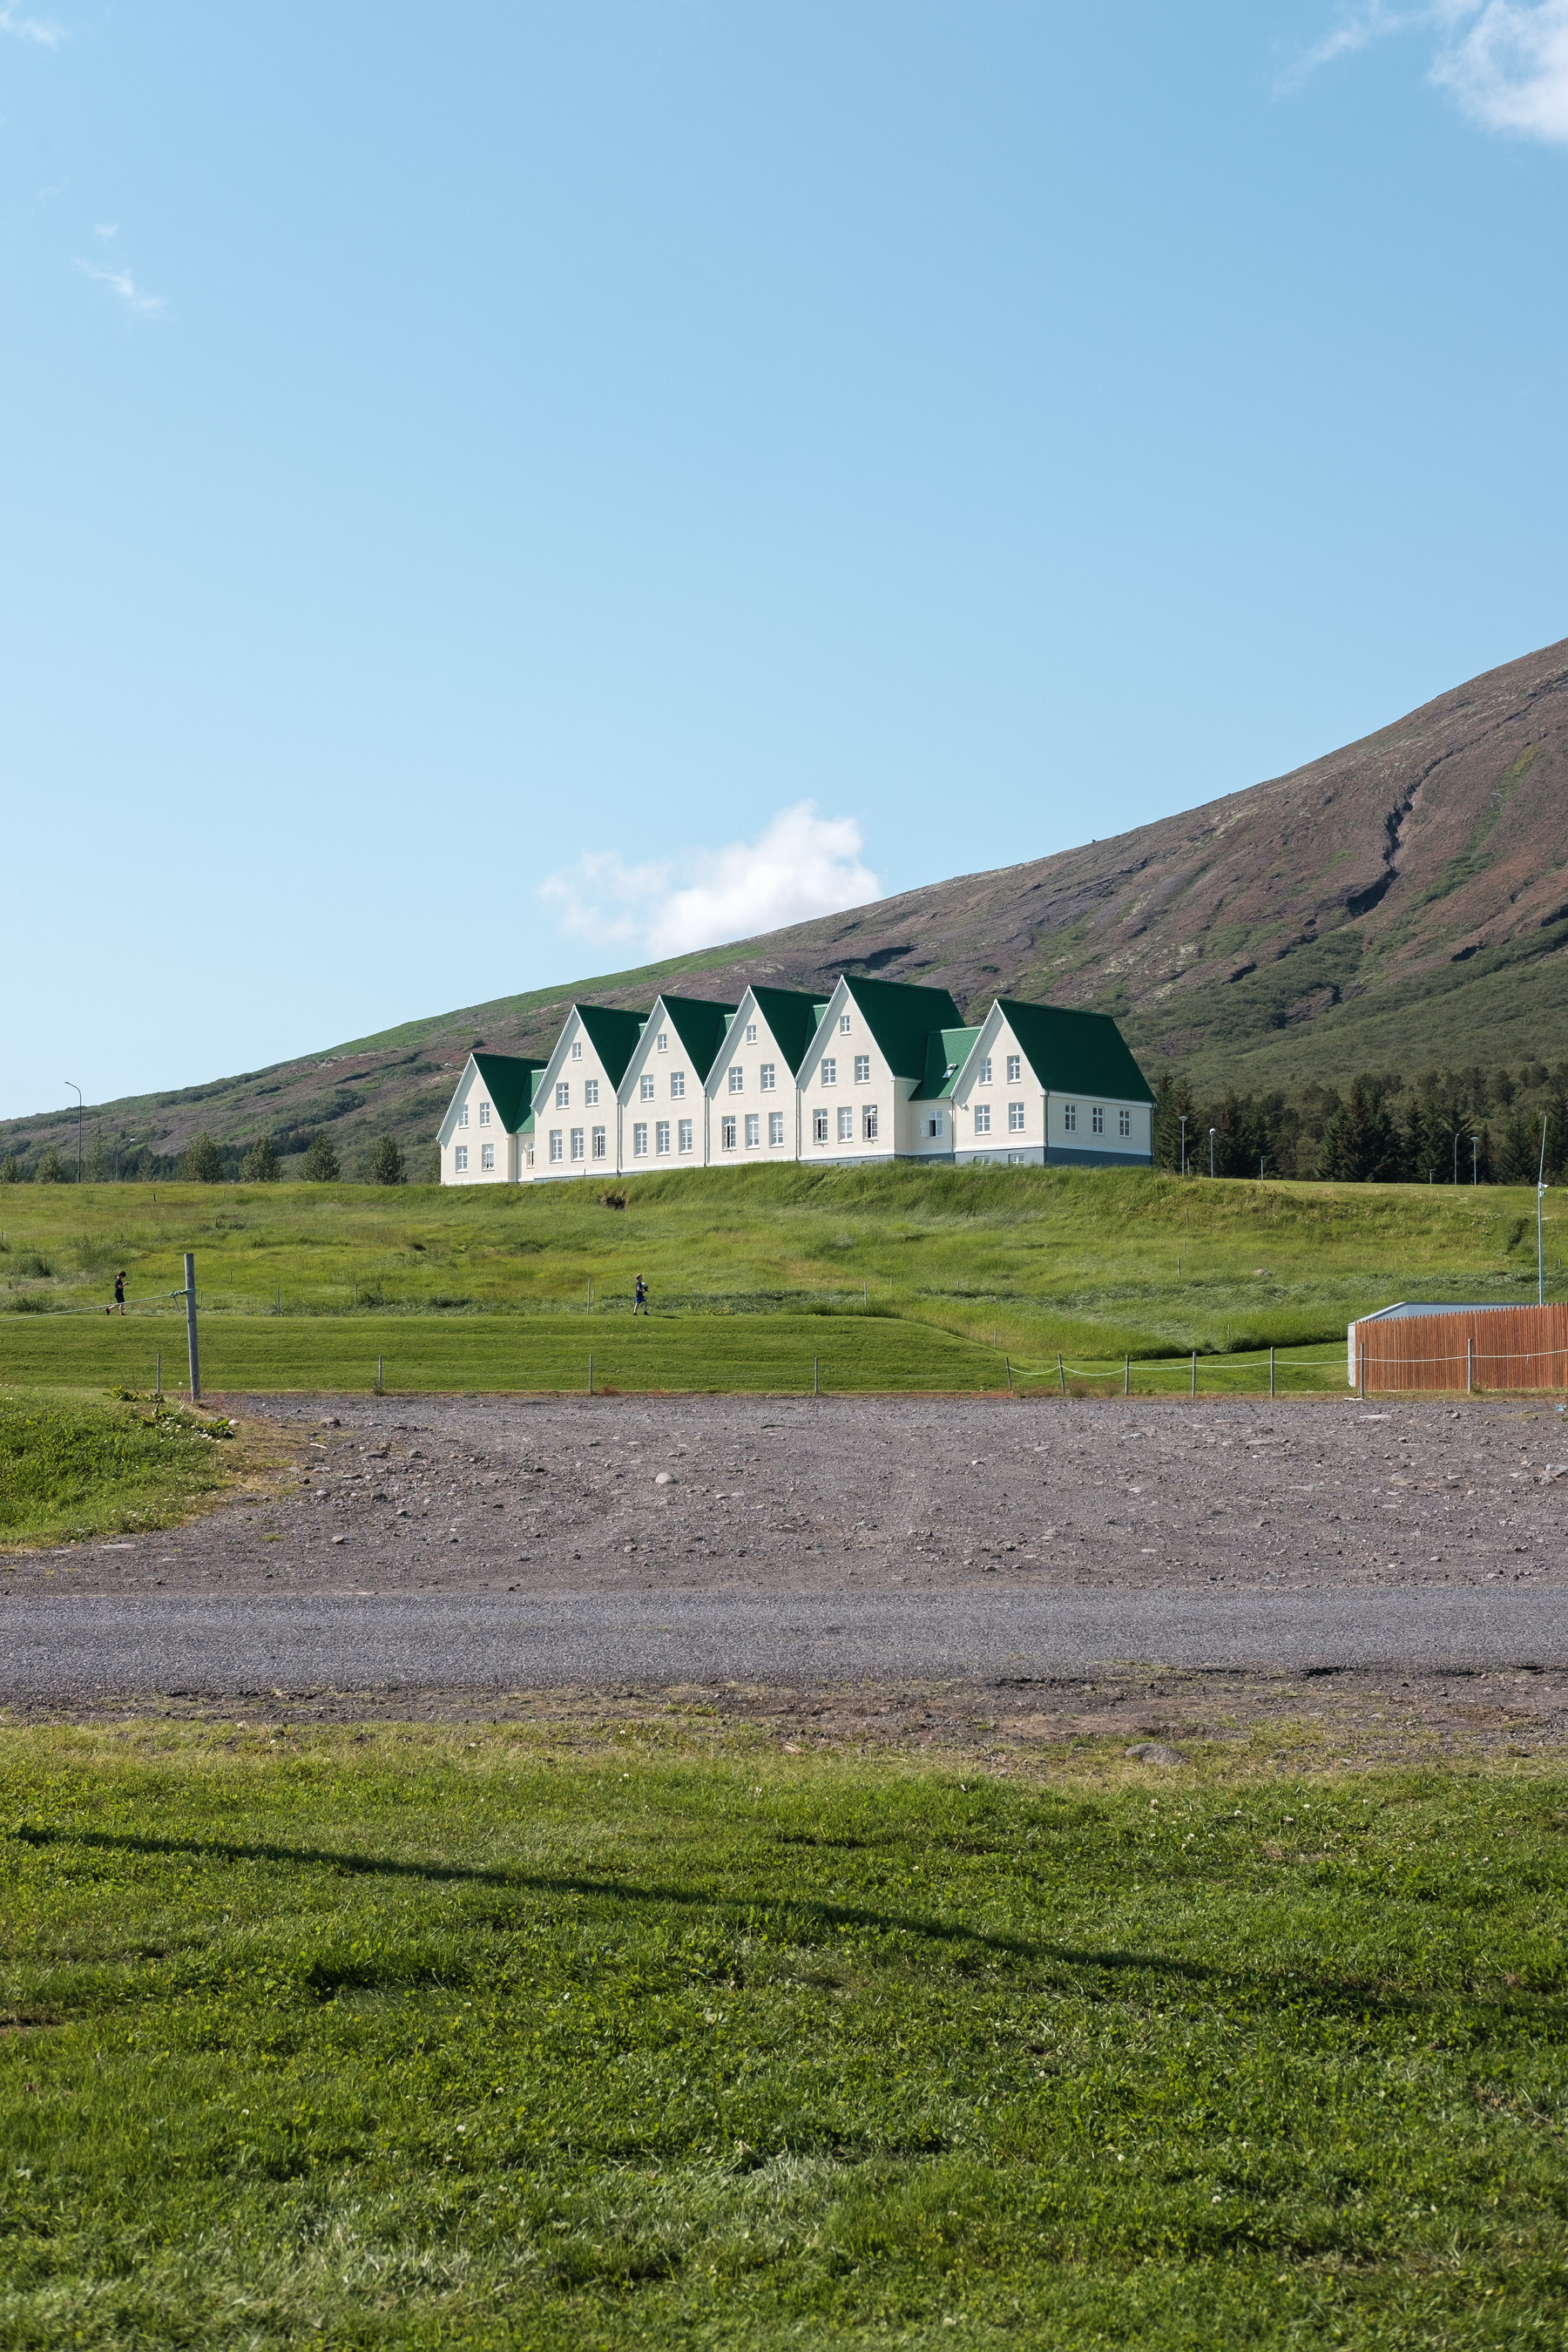 The old boarding school at Laugarvatn, now a hotel